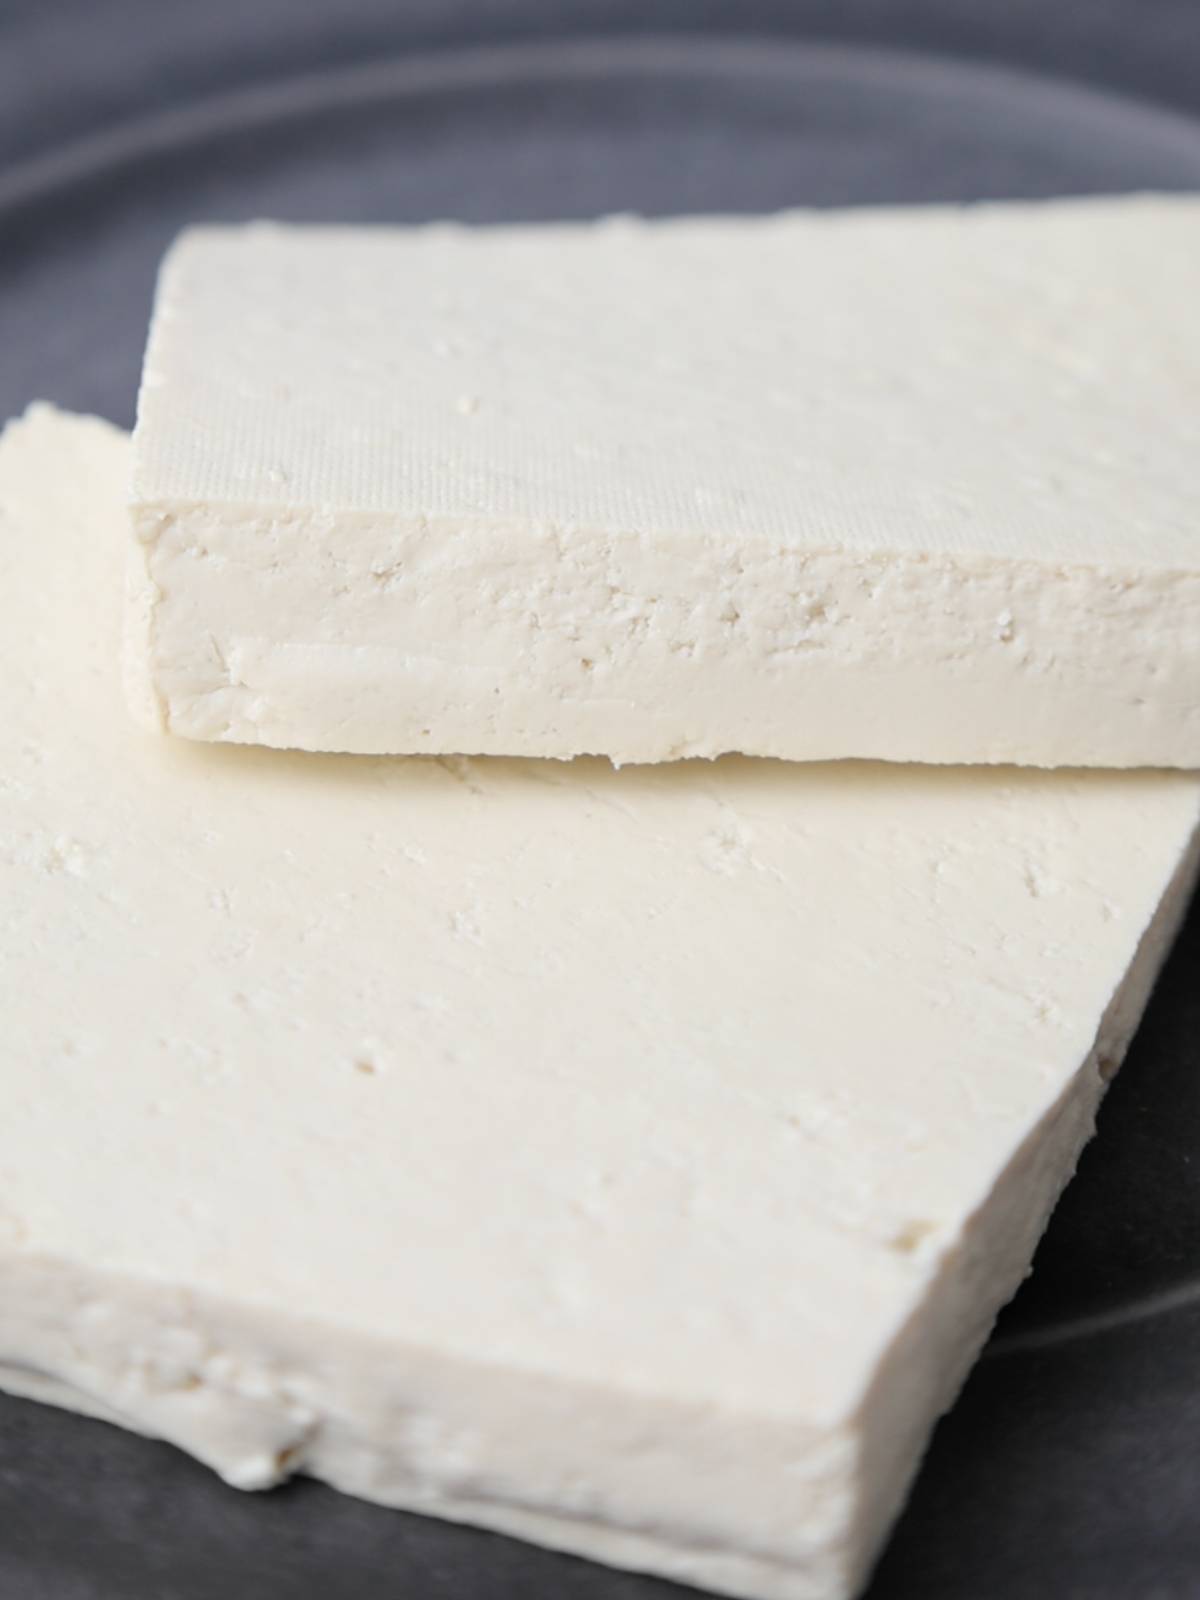 Pressed extra firm tofu block cut into two slices.